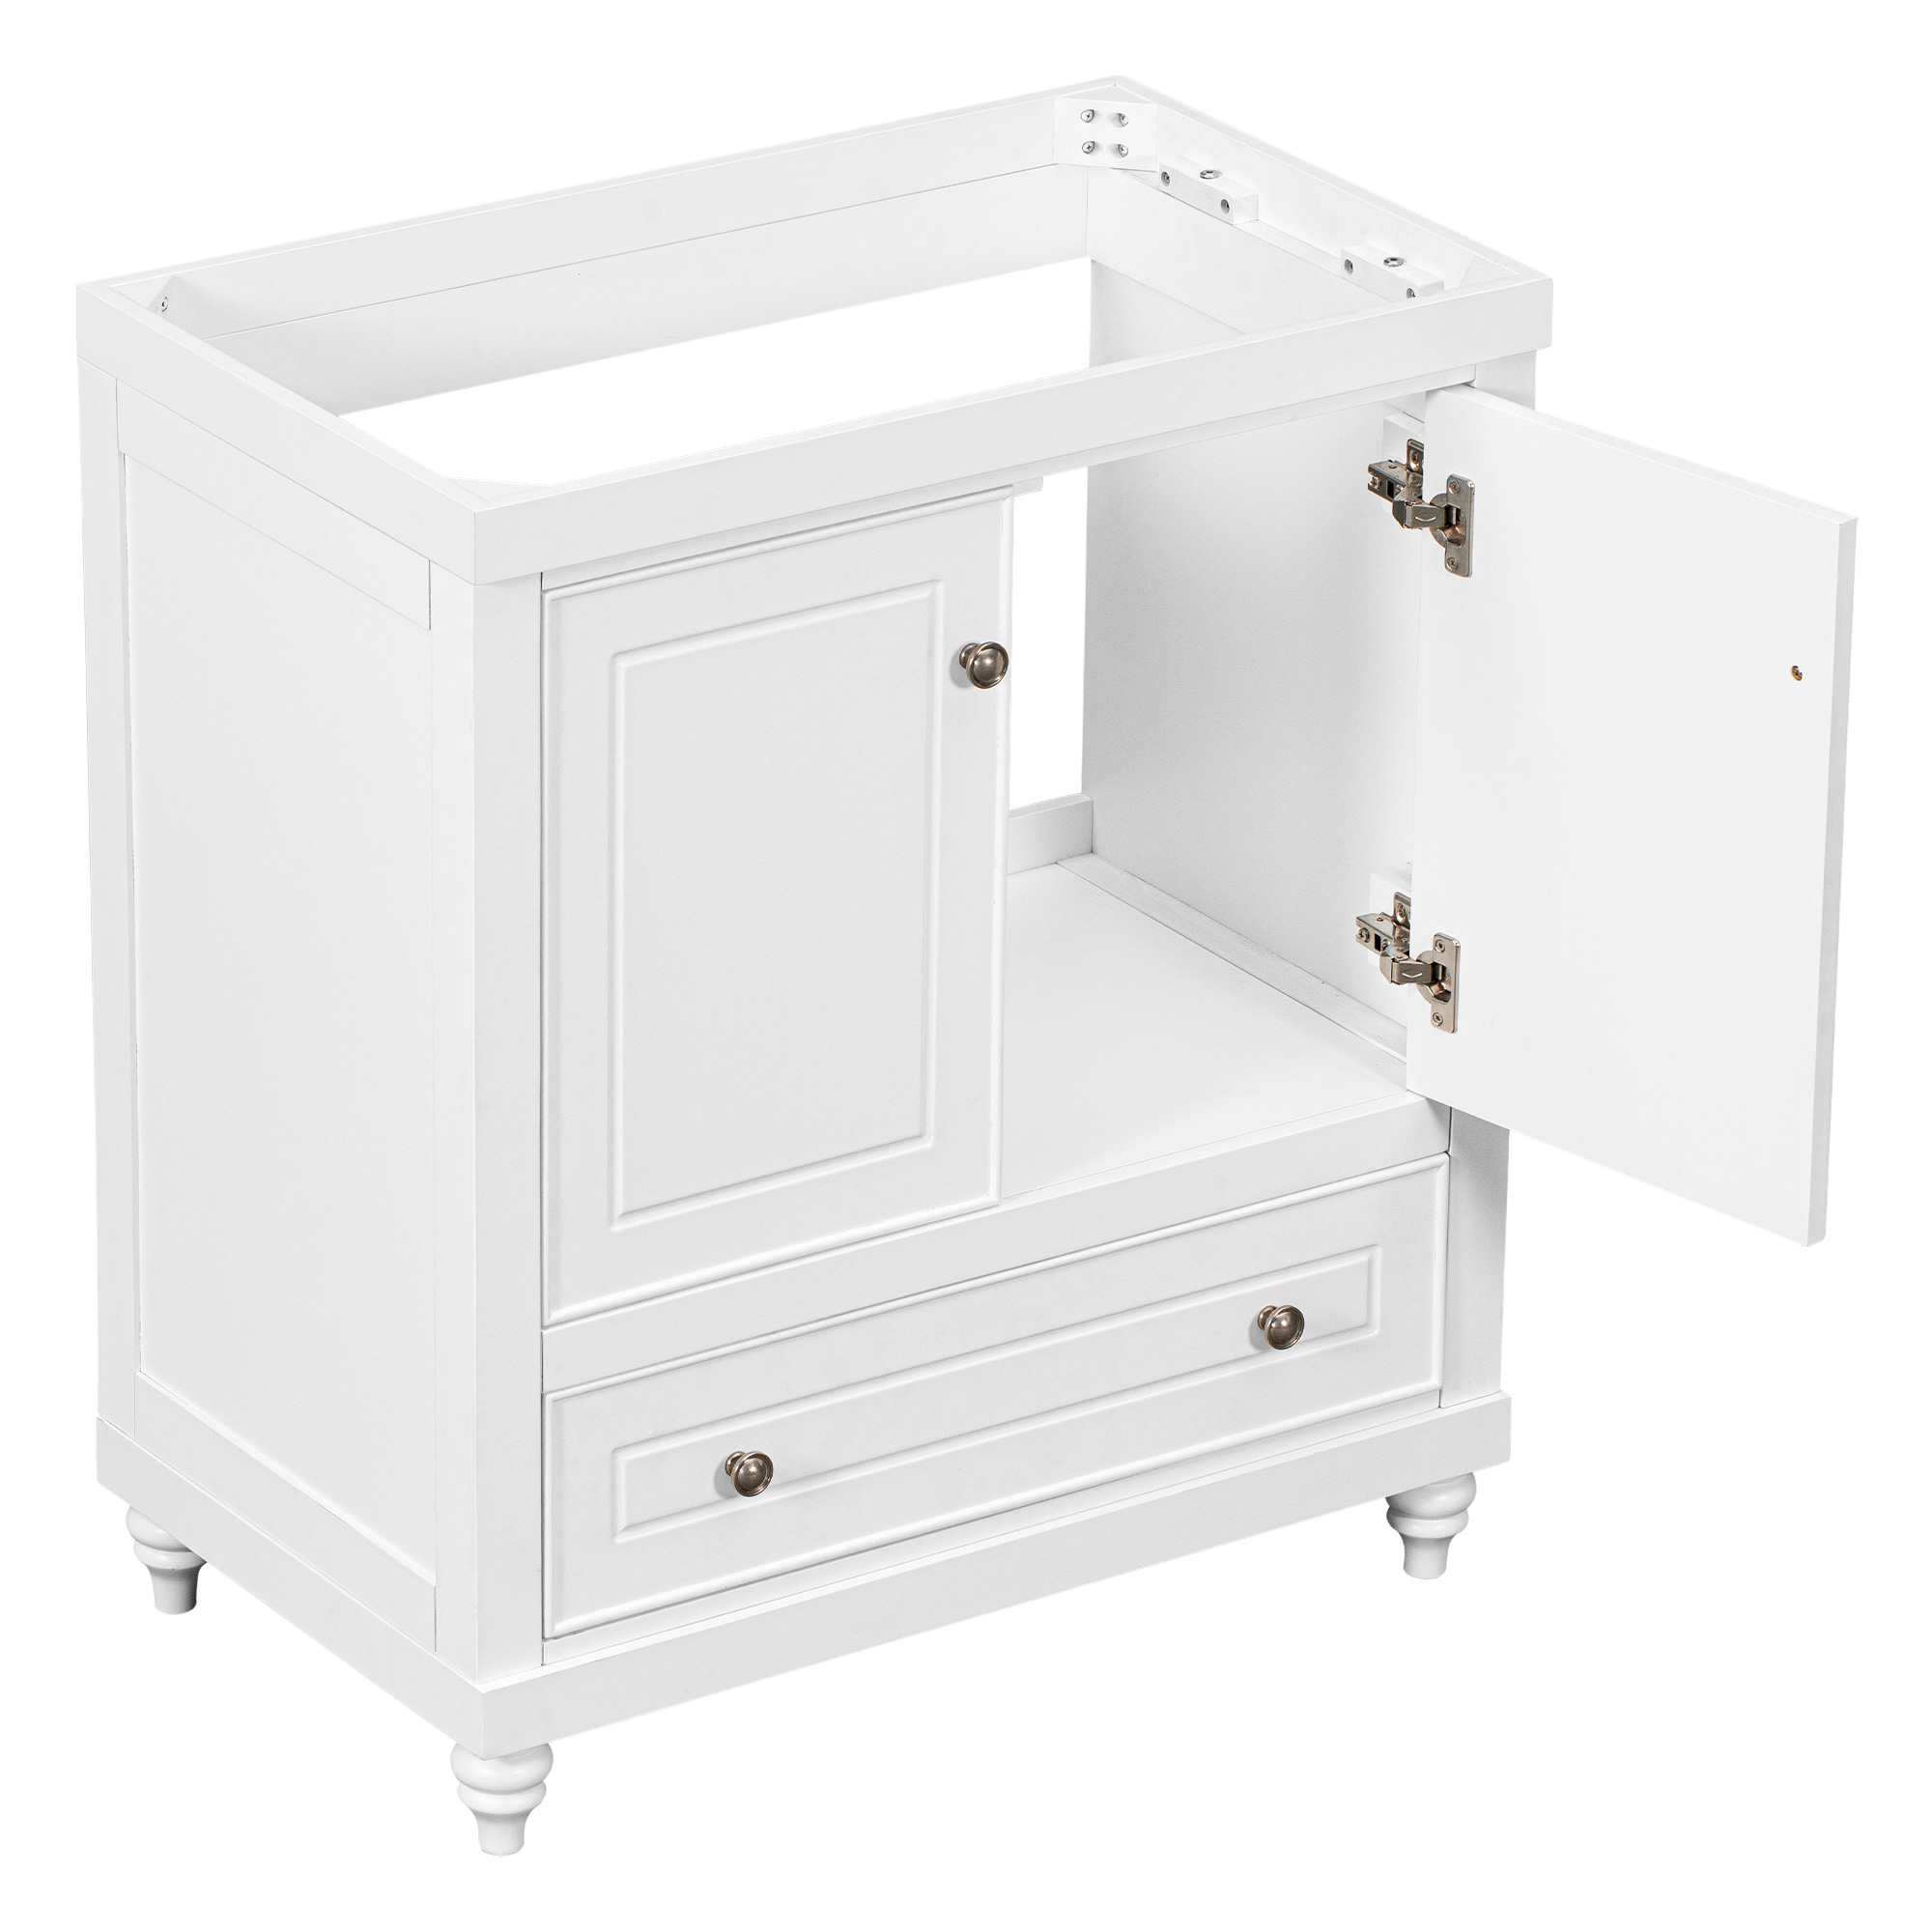 30 Inches Bathroom Vanity without Sink - WF296704AAK